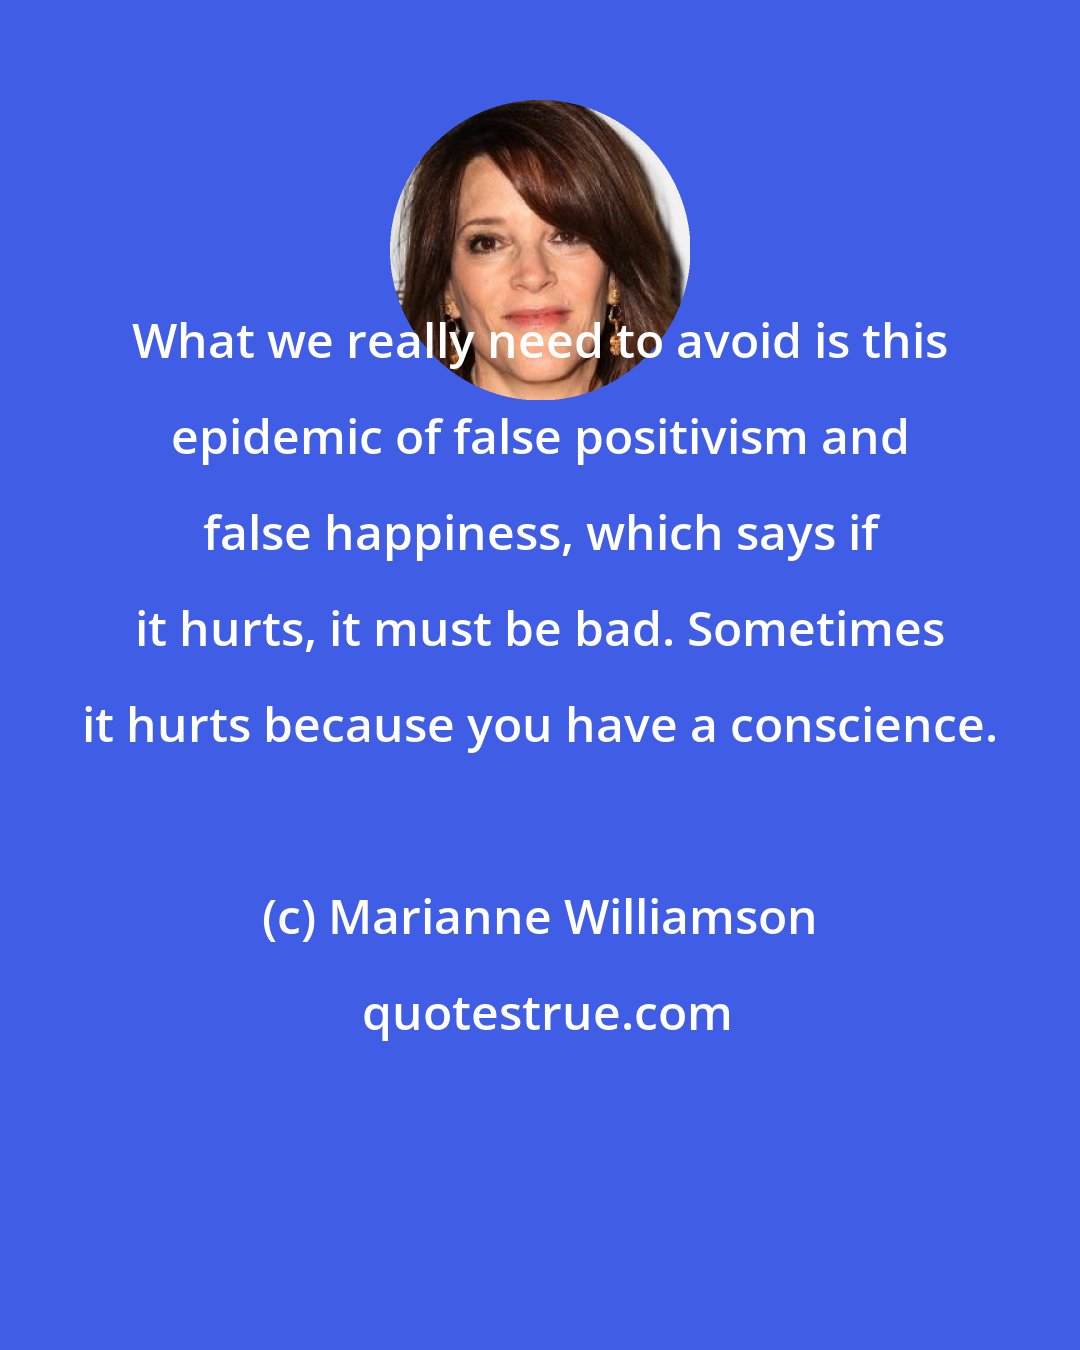 Marianne Williamson: What we really need to avoid is this epidemic of false positivism and false happiness, which says if it hurts, it must be bad. Sometimes it hurts because you have a conscience.